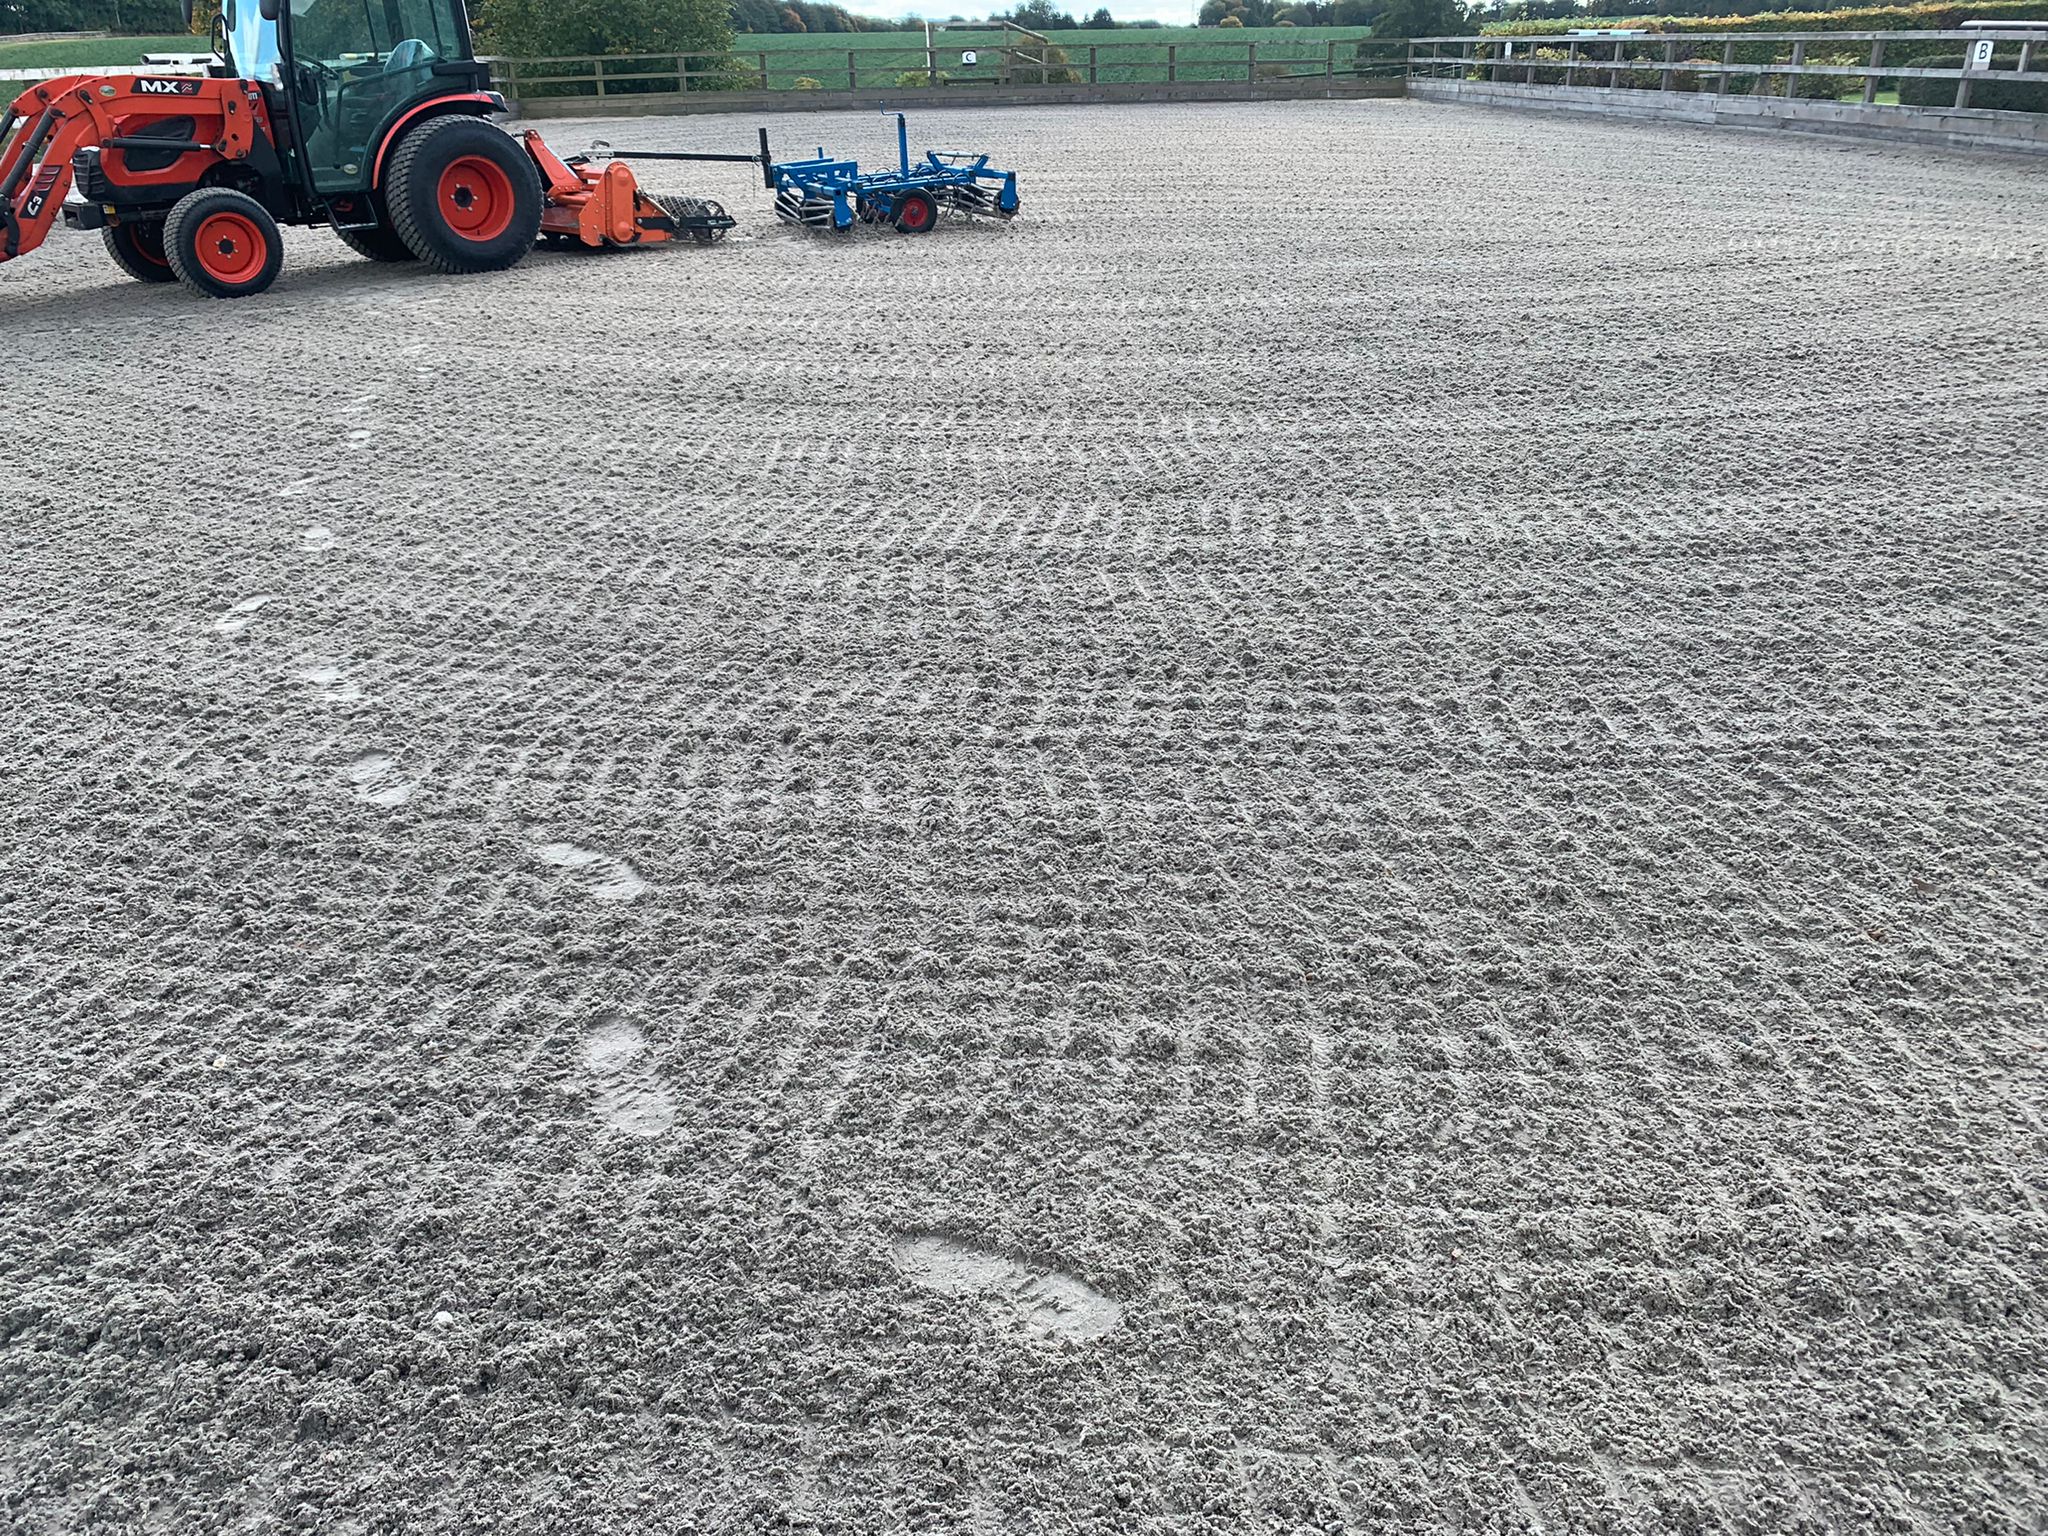 Maintaining equestrian surface